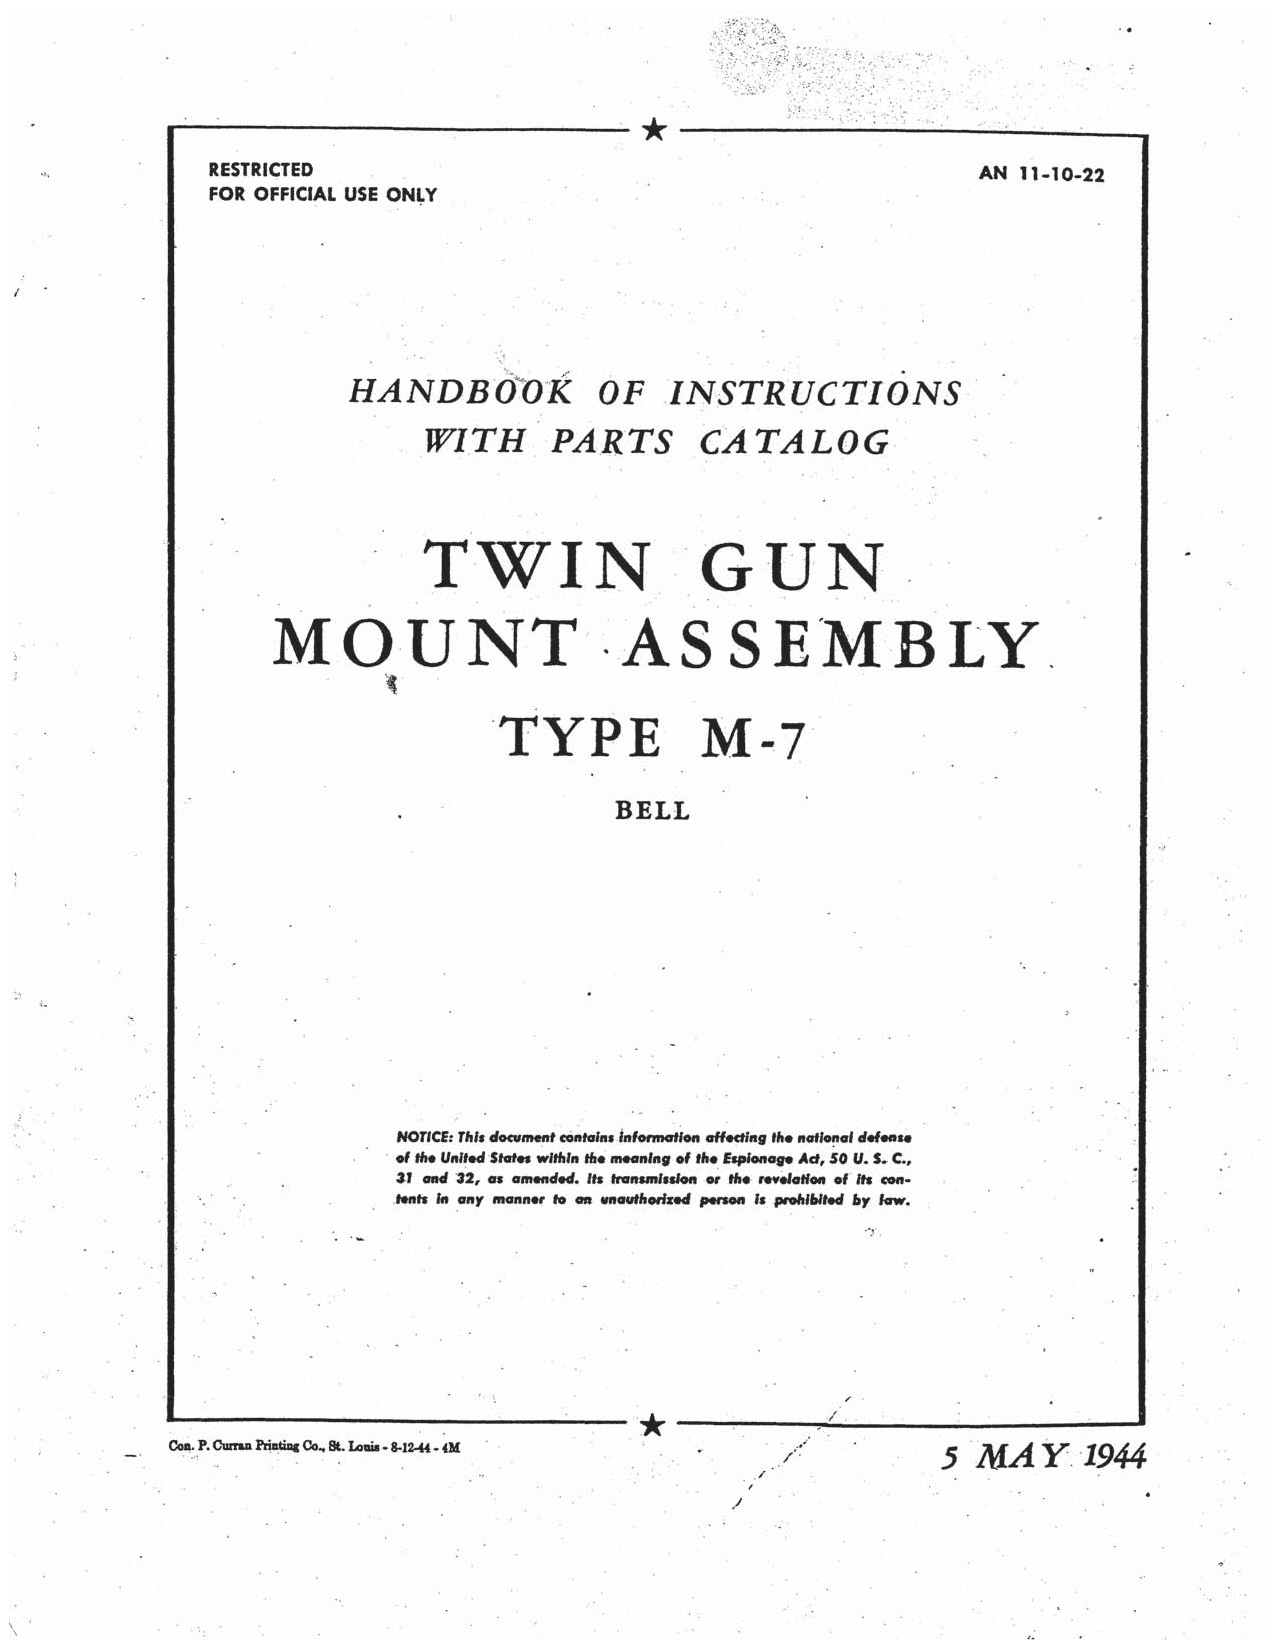 Sample page 1 from AirCorps Library document: Twin Gun Mount Assembly - Type M-7 - Bell